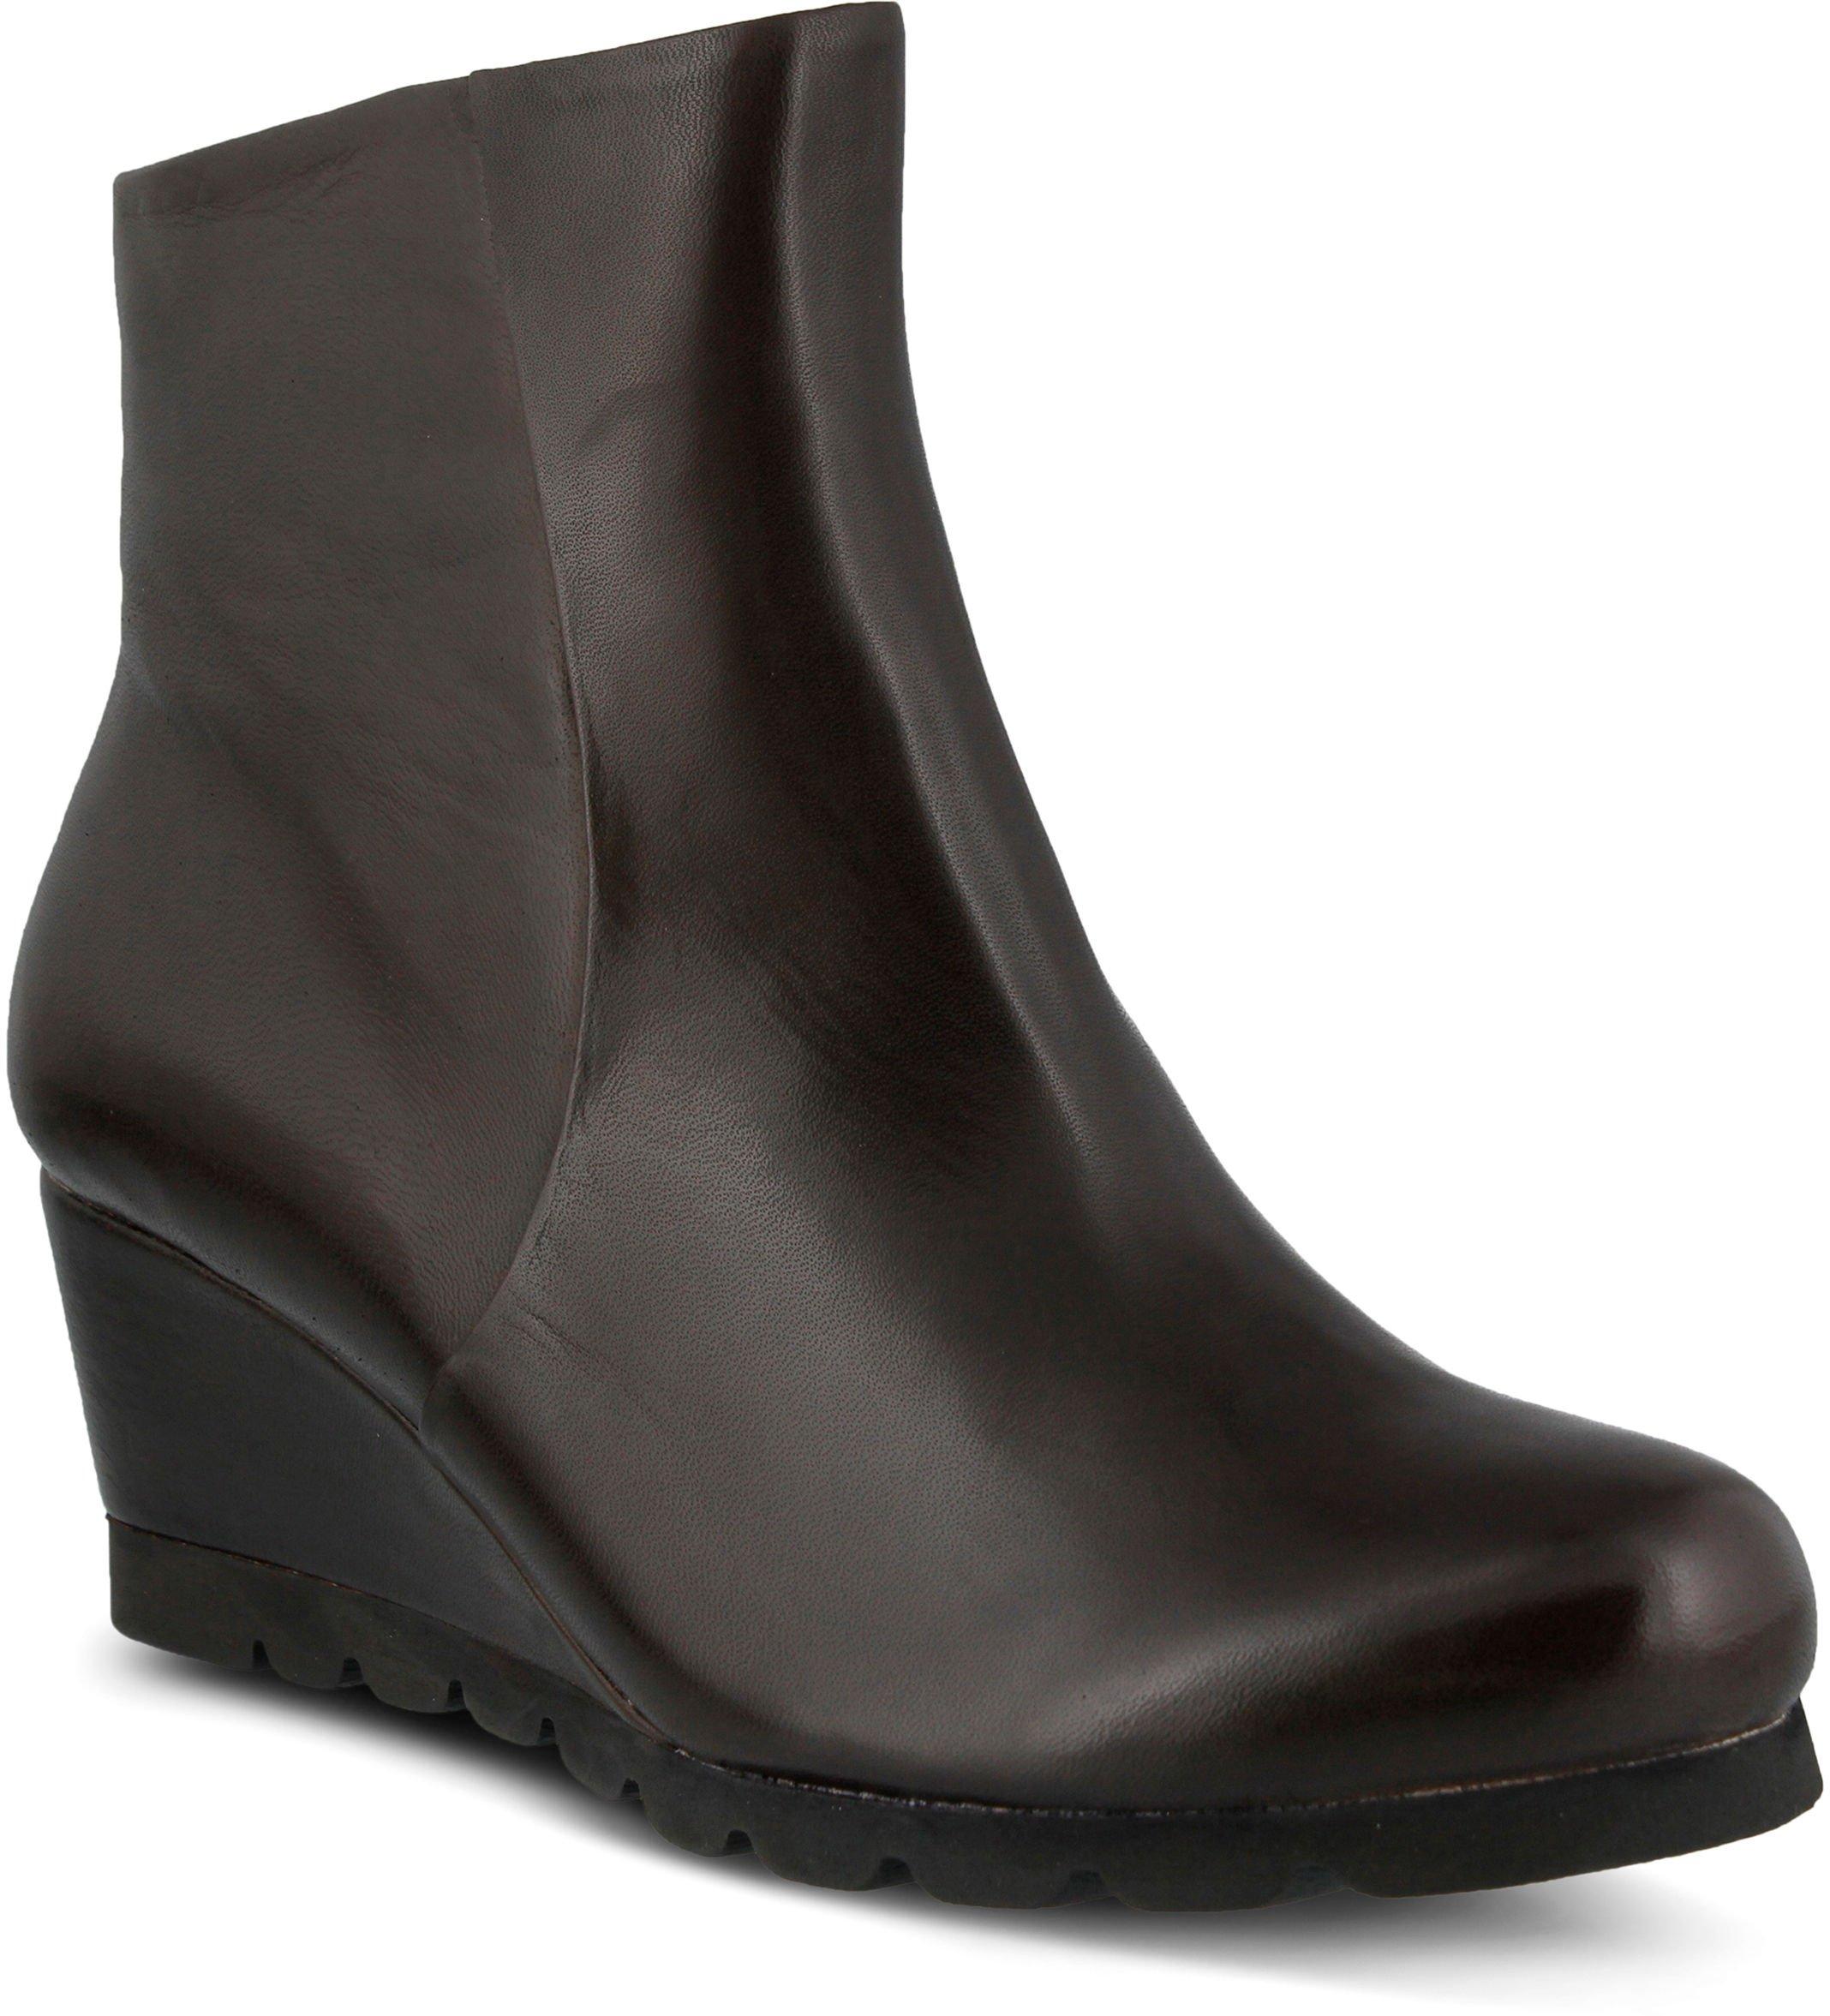 Spring Step Womens Ravel Pull On Wedge Bootie